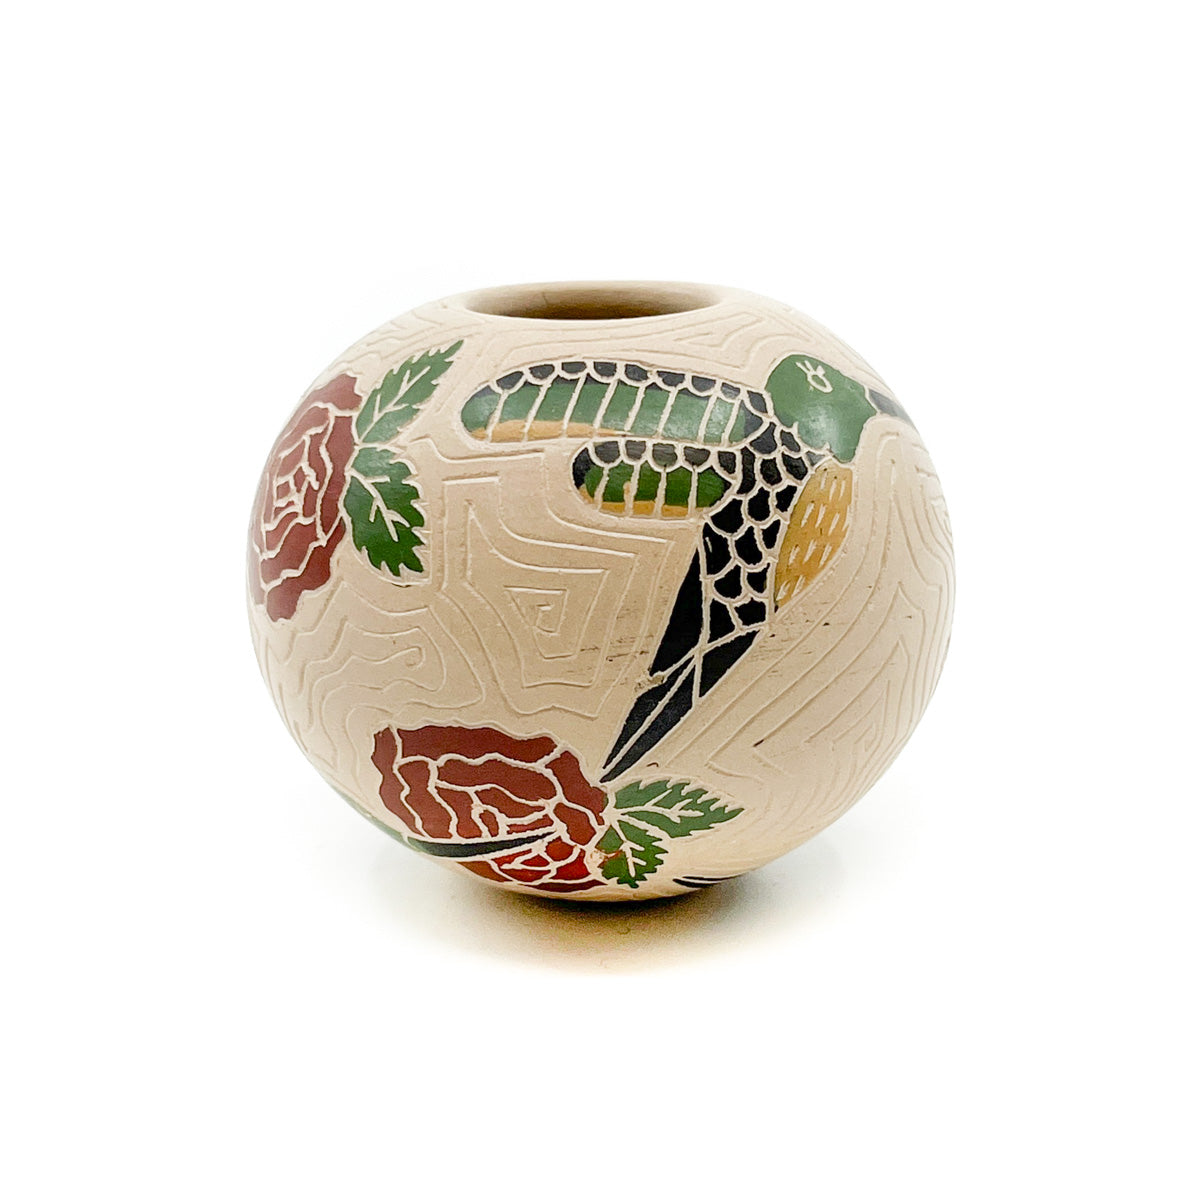 Seed Pot with Multi-colored Hummingbirds on White Clay